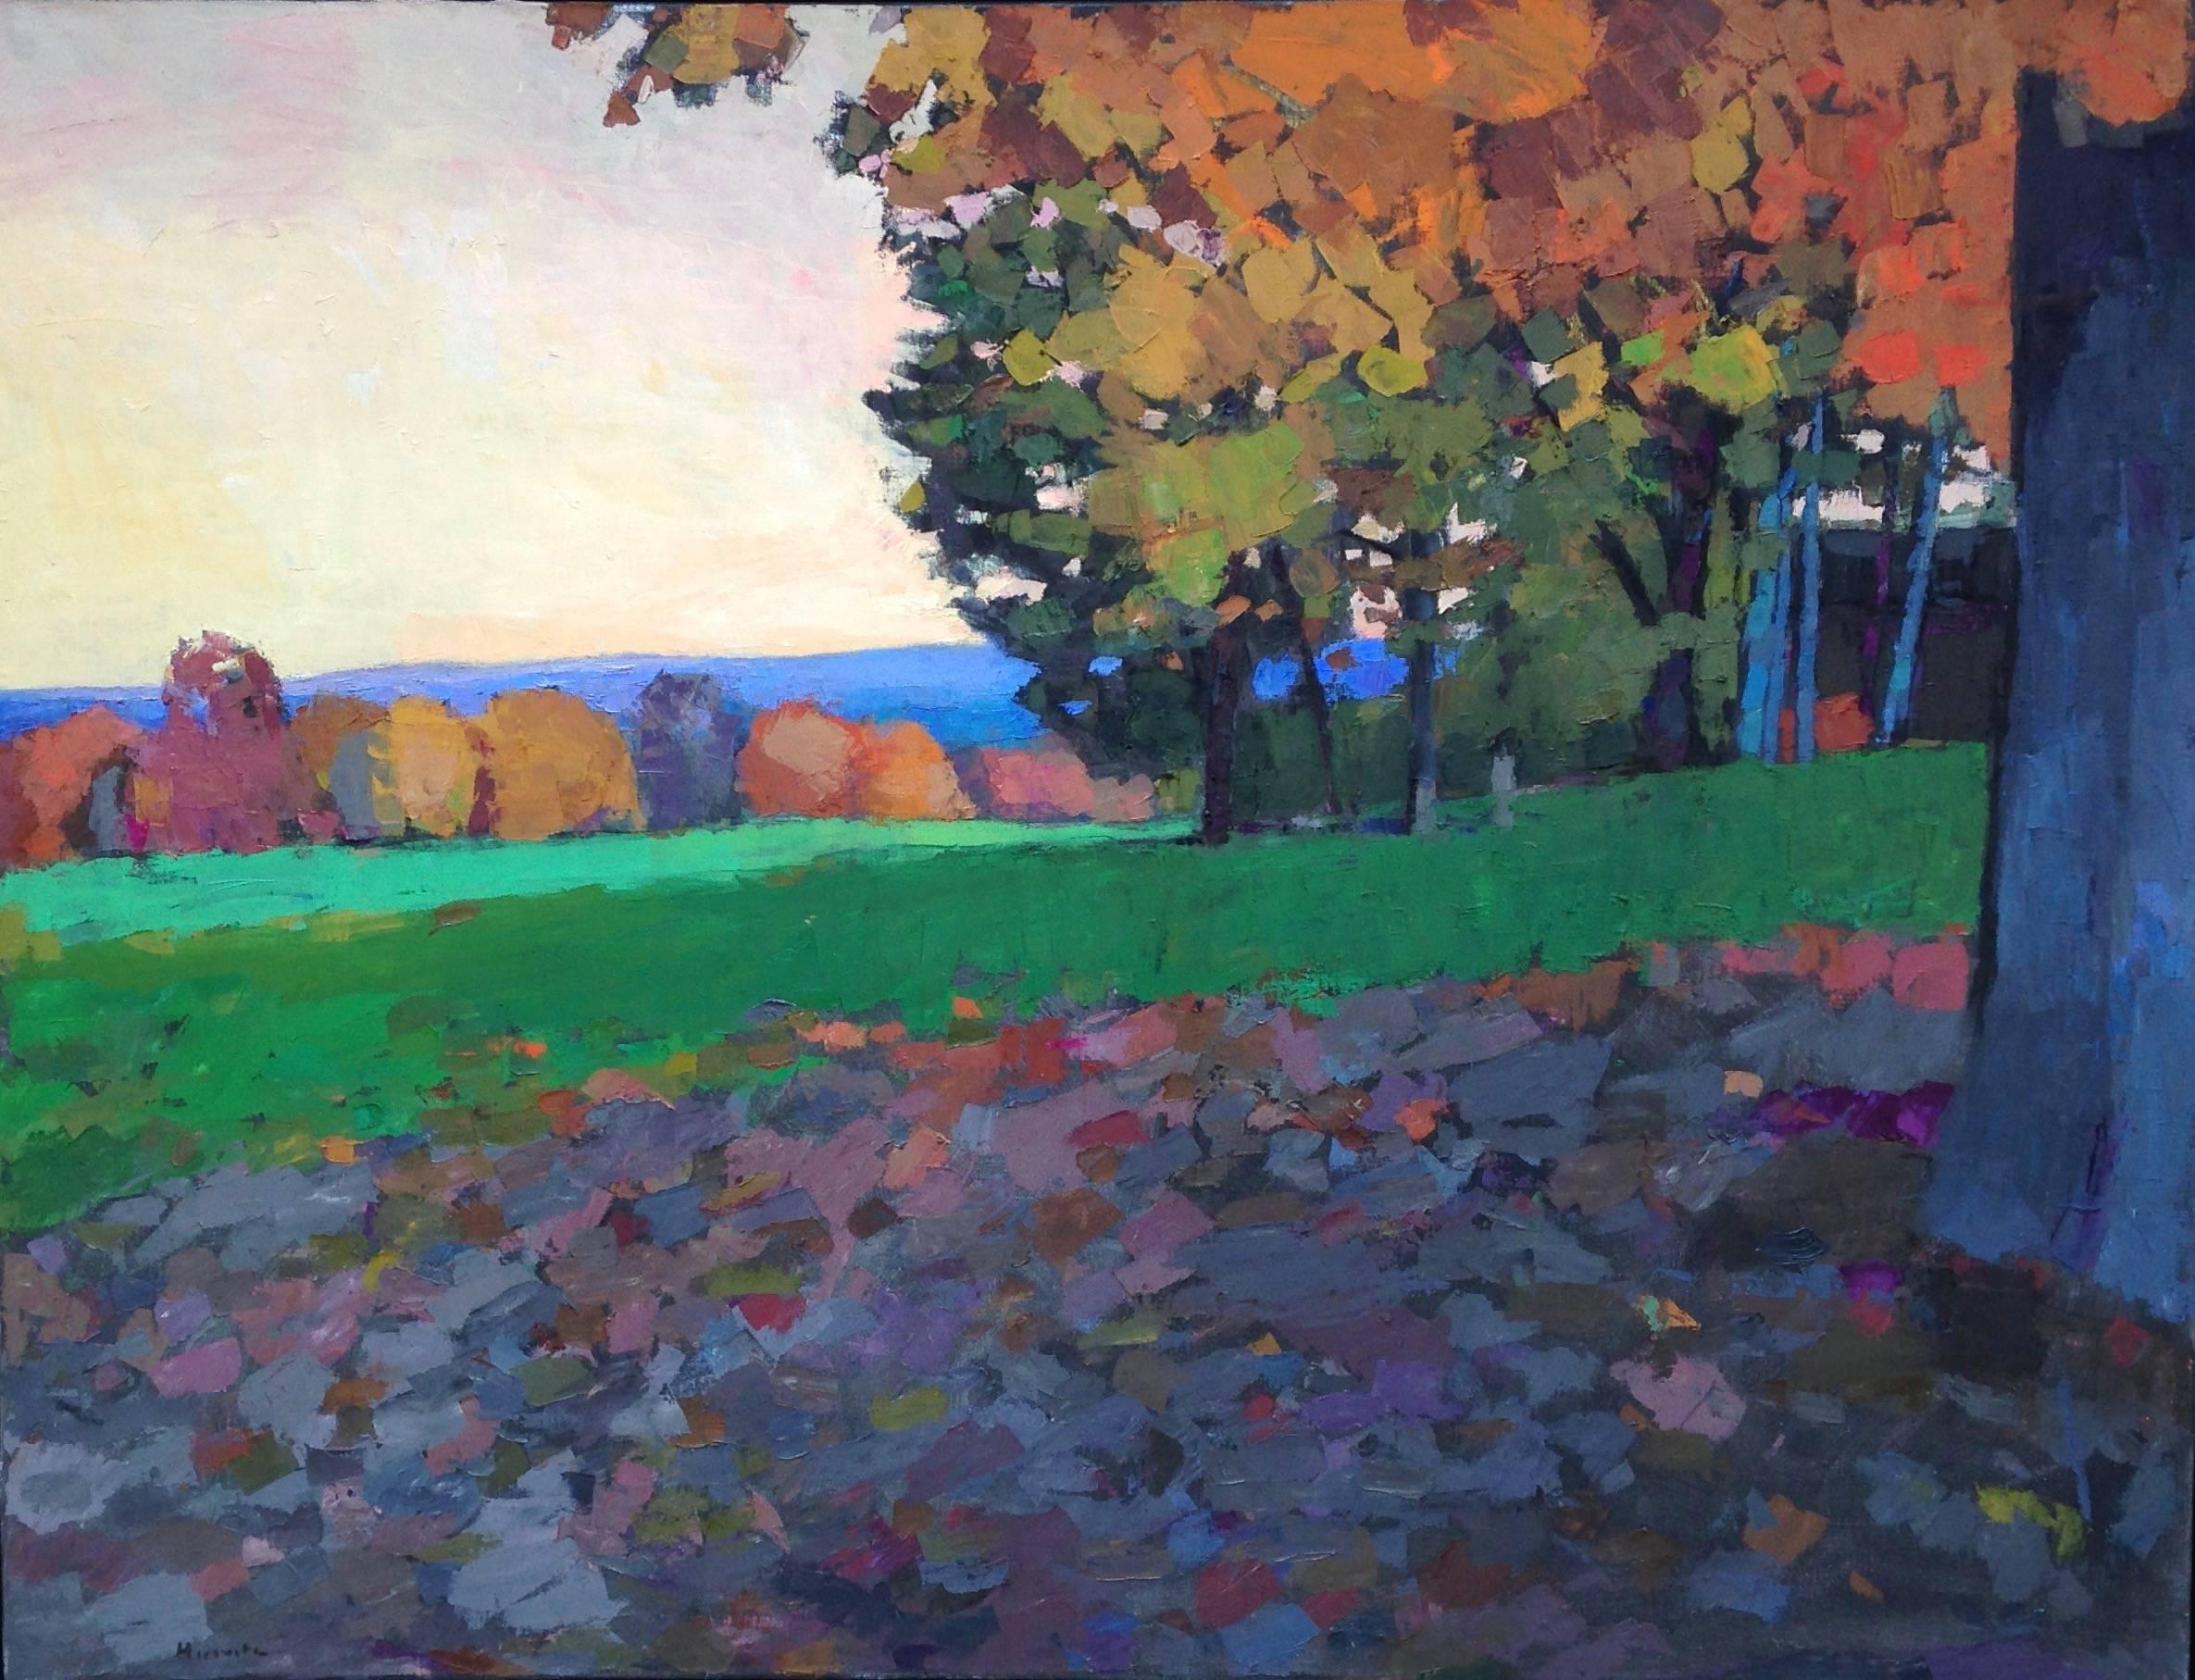 Larry Horowitz Landscape Painting - "New England Farm" oil painting of a green farm with Autumn foliage